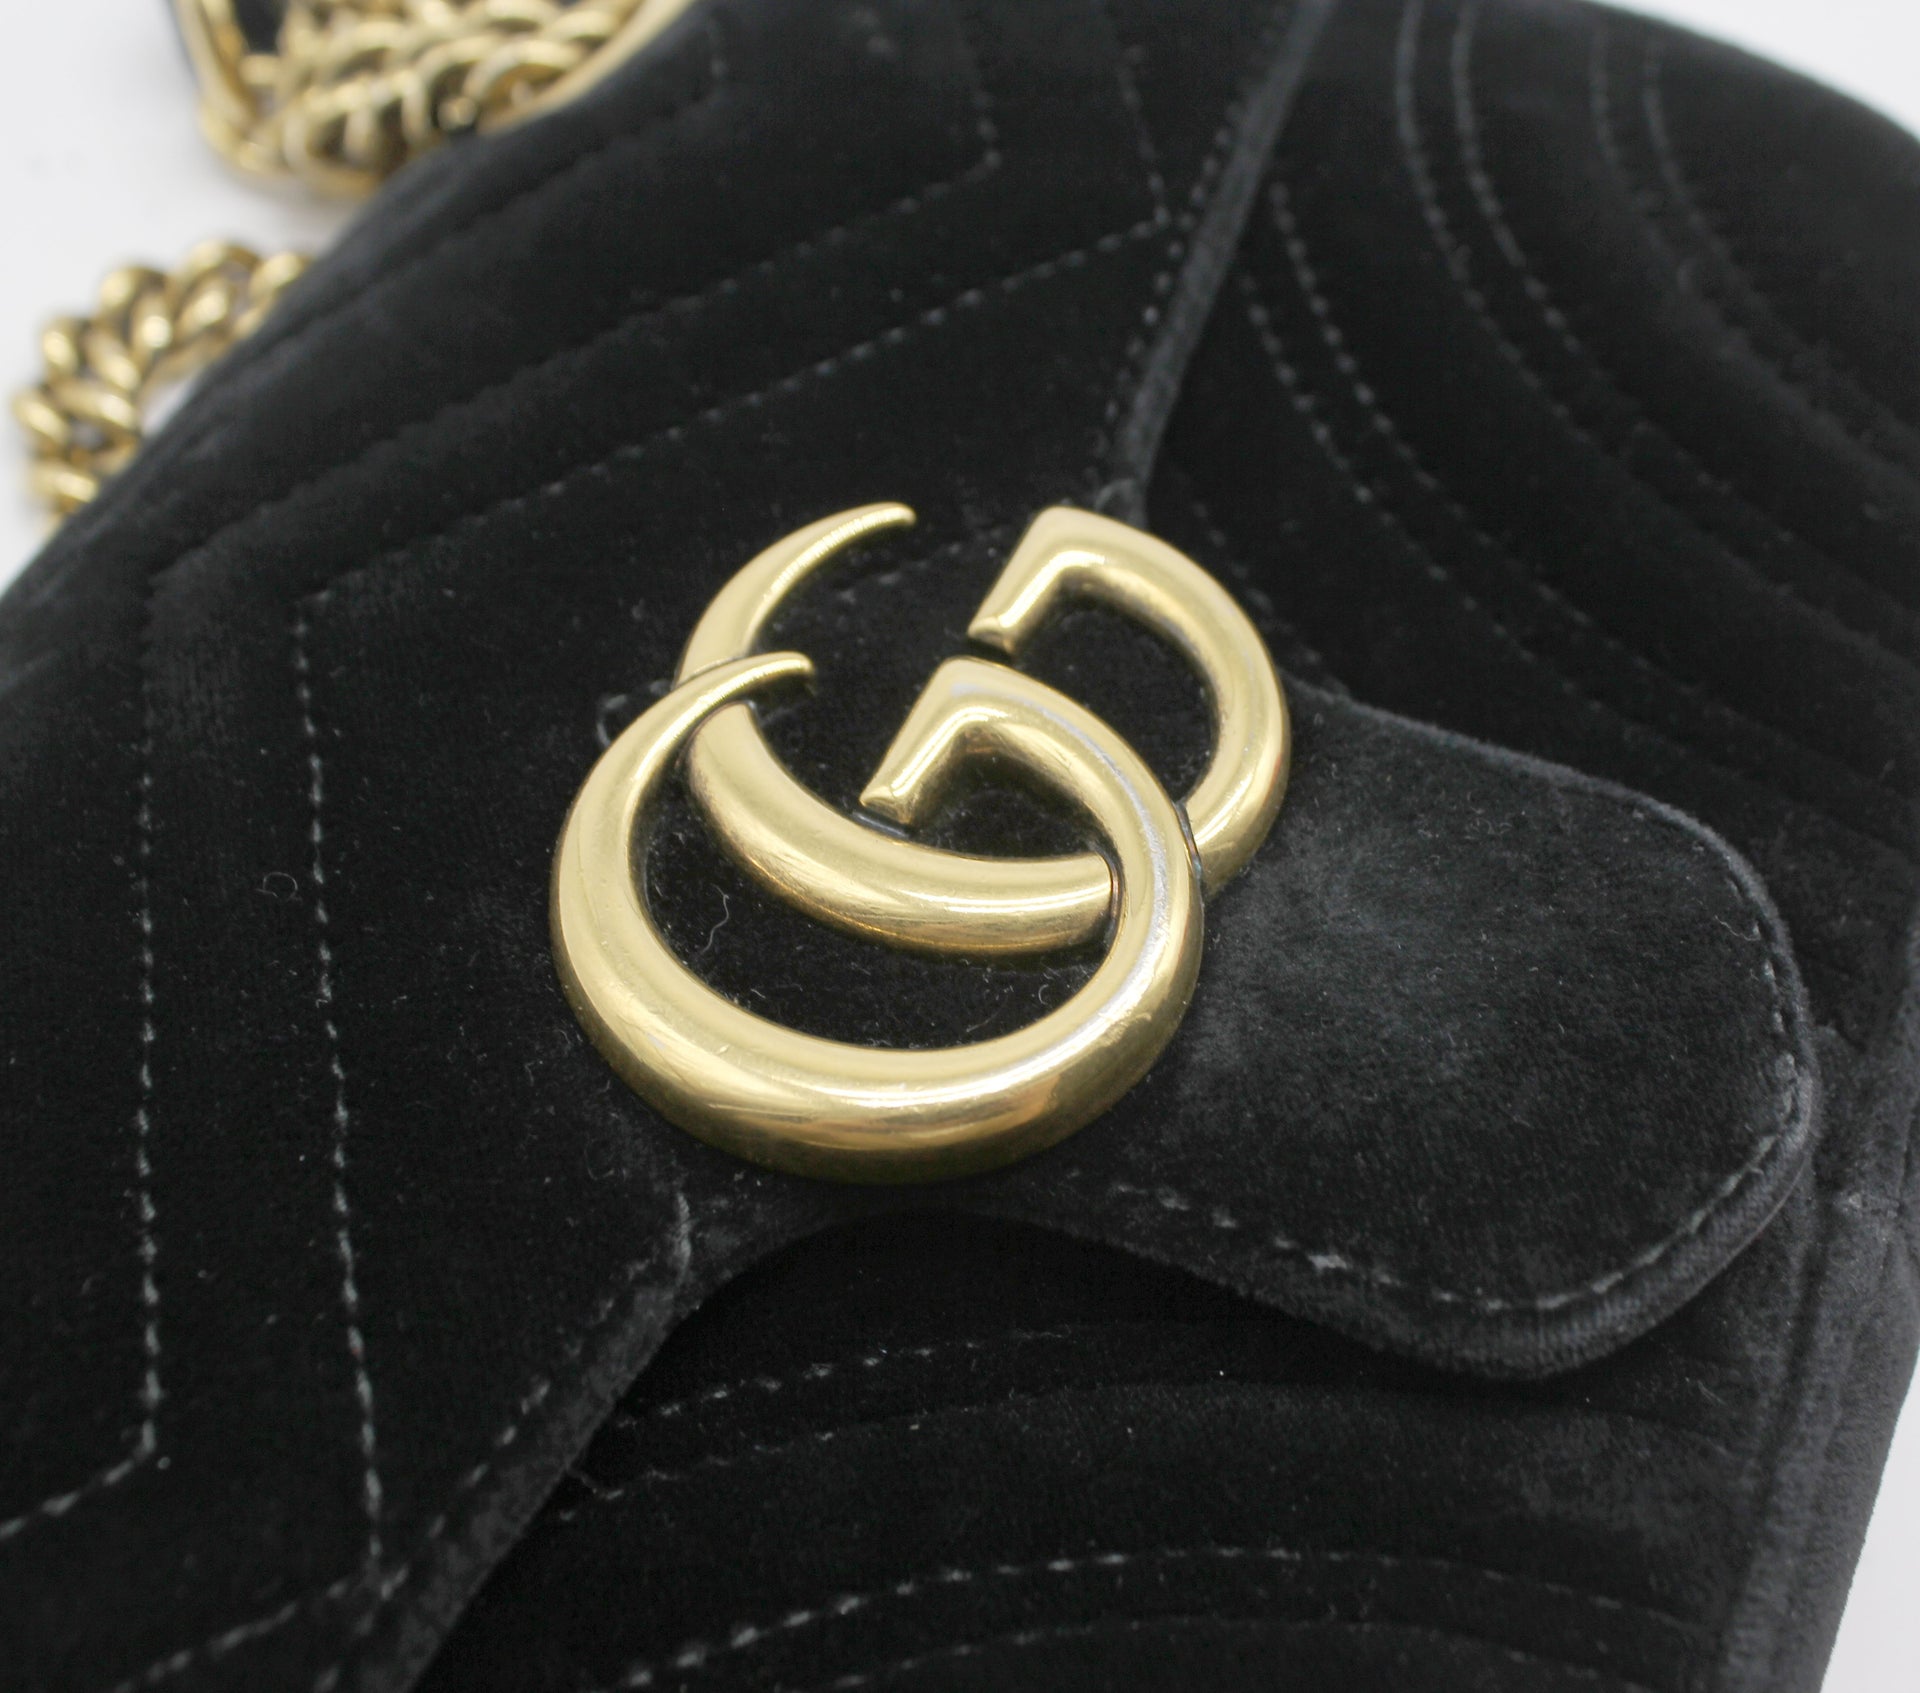 Gucci GG Marmont Small Velvet Quilted Shoulder Bag